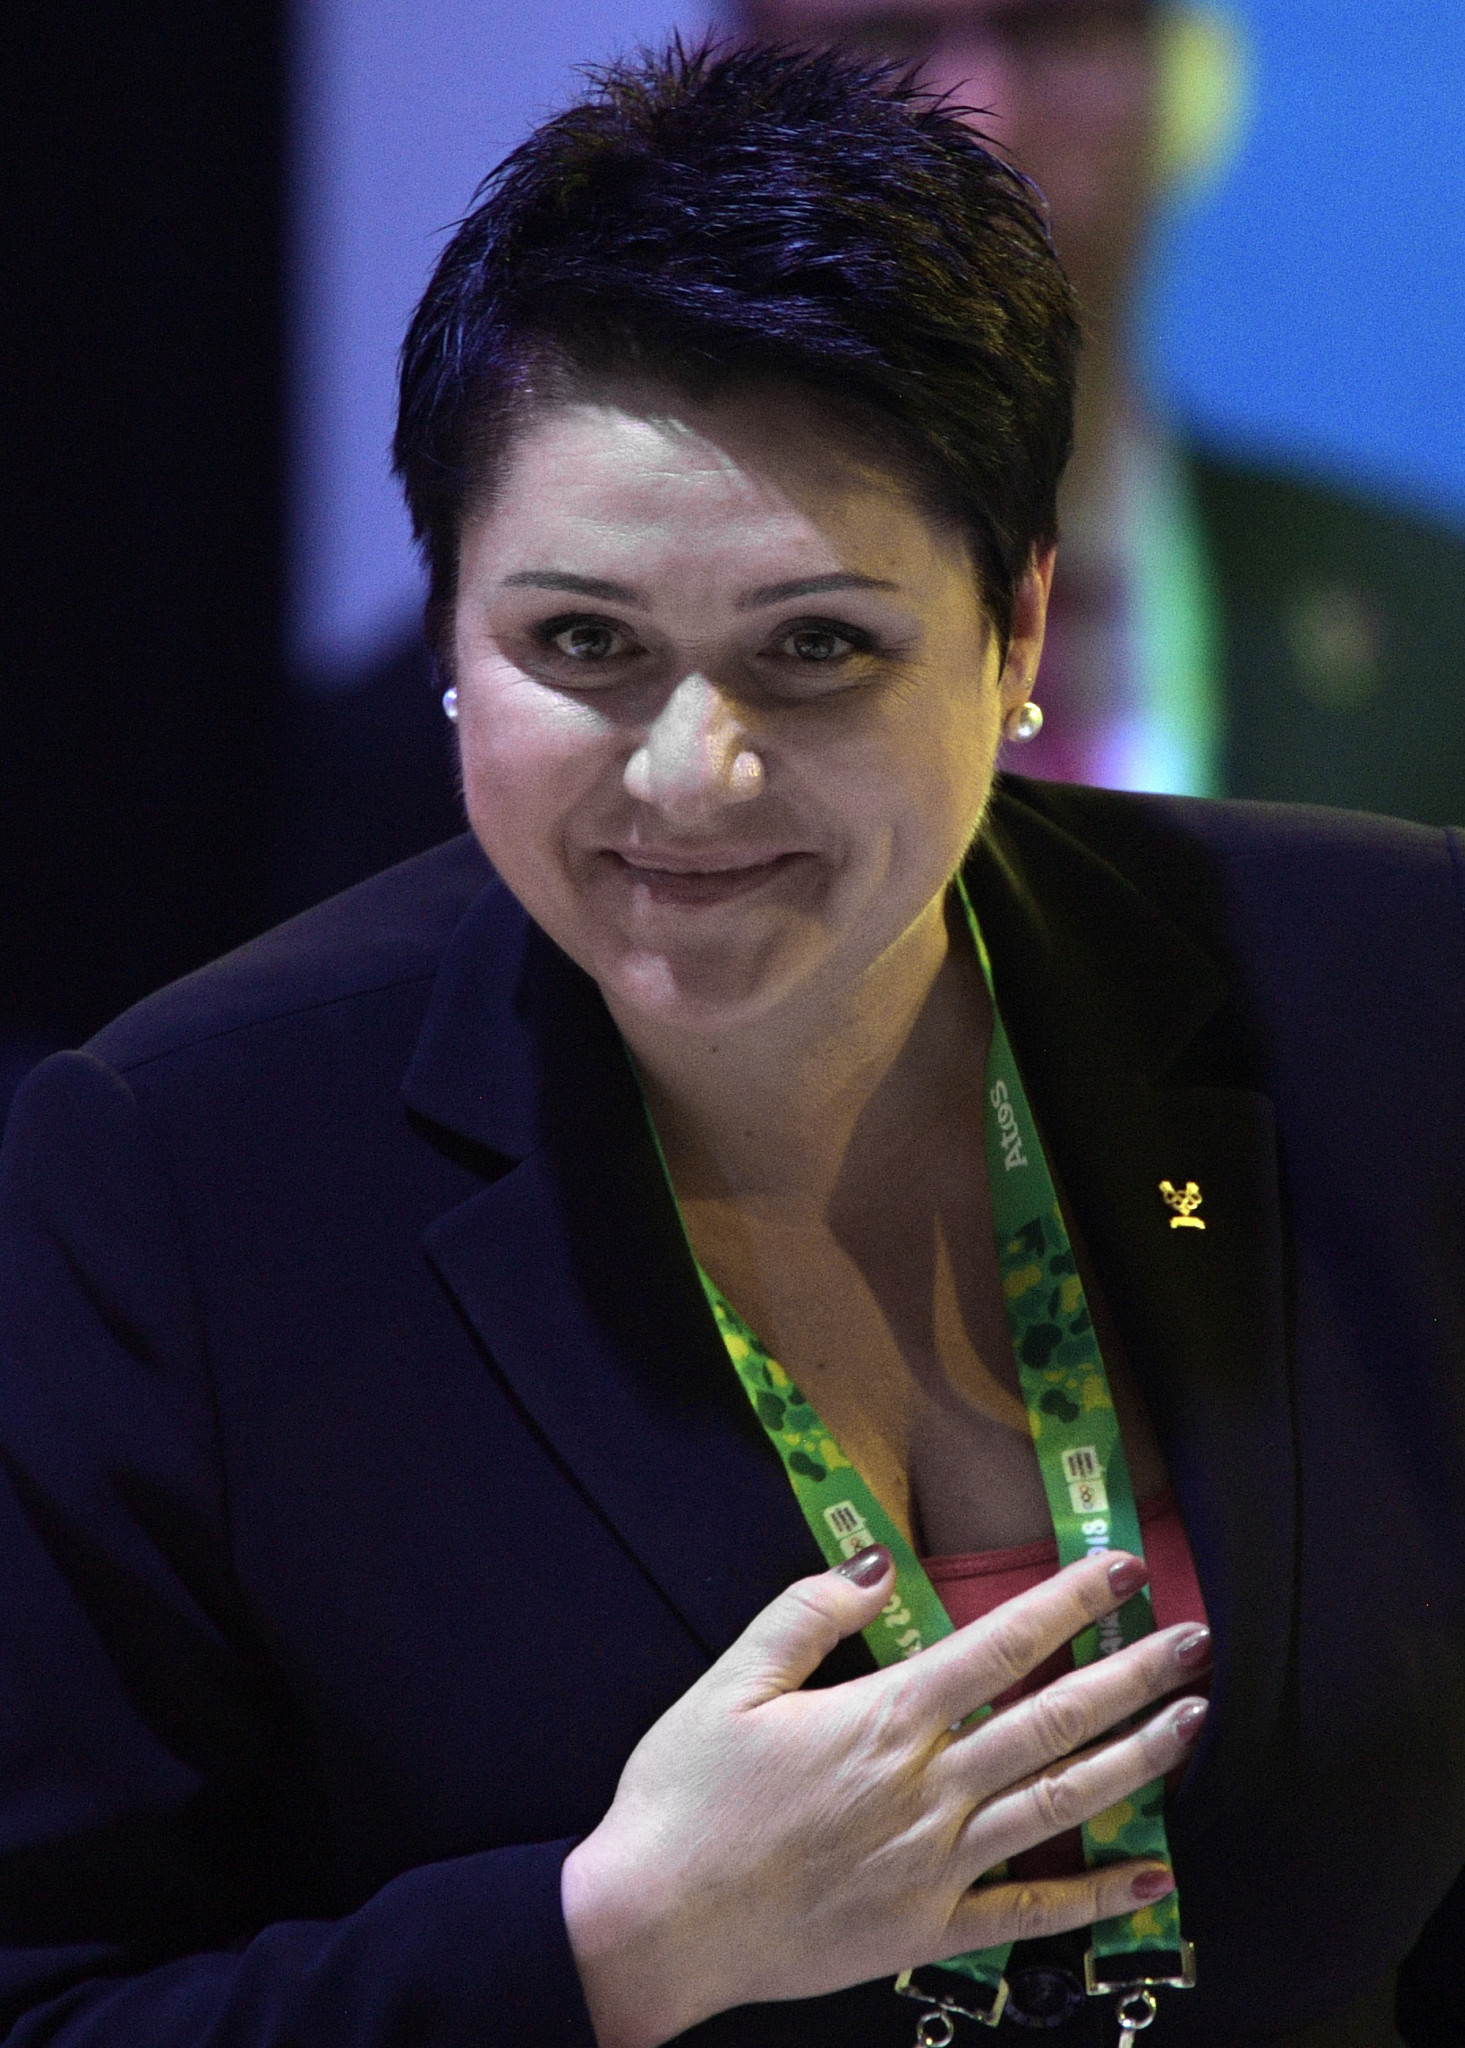 LNOC President Daina Gudzinevičiūtė said International Olympic Committee members were impressed with the choice of venue ©Getty Images